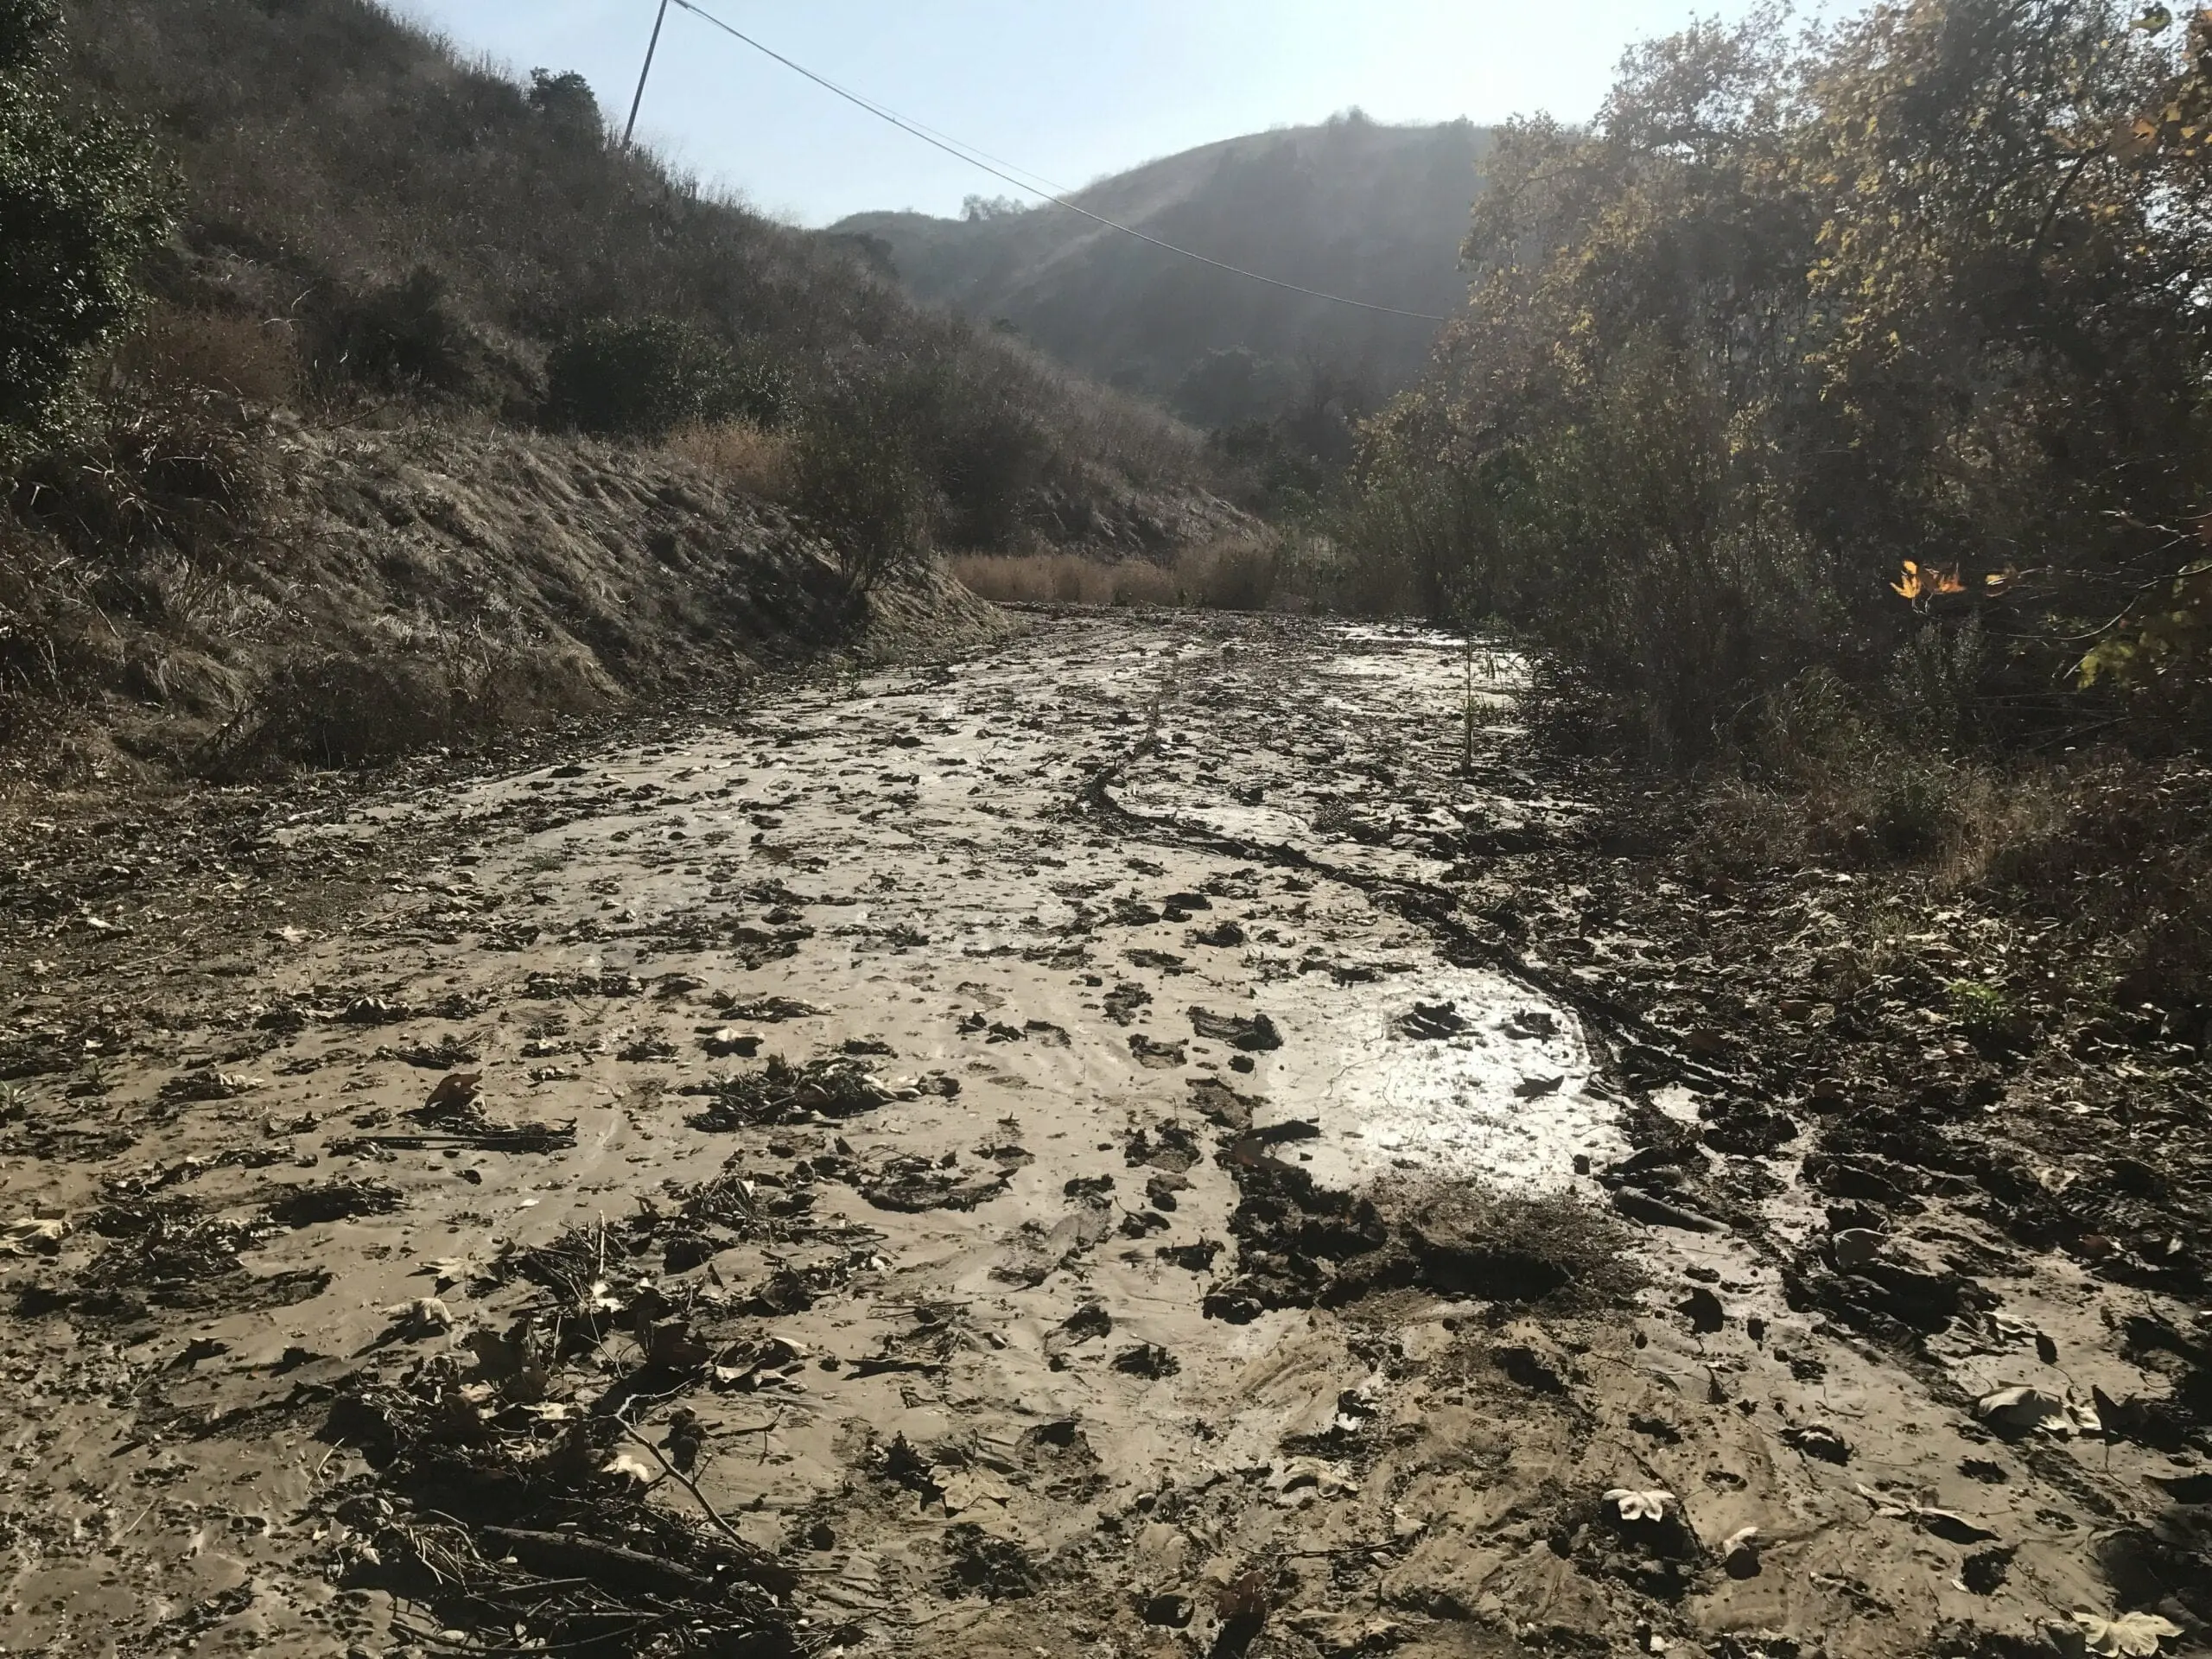 Turnbull Canyon dry river bed